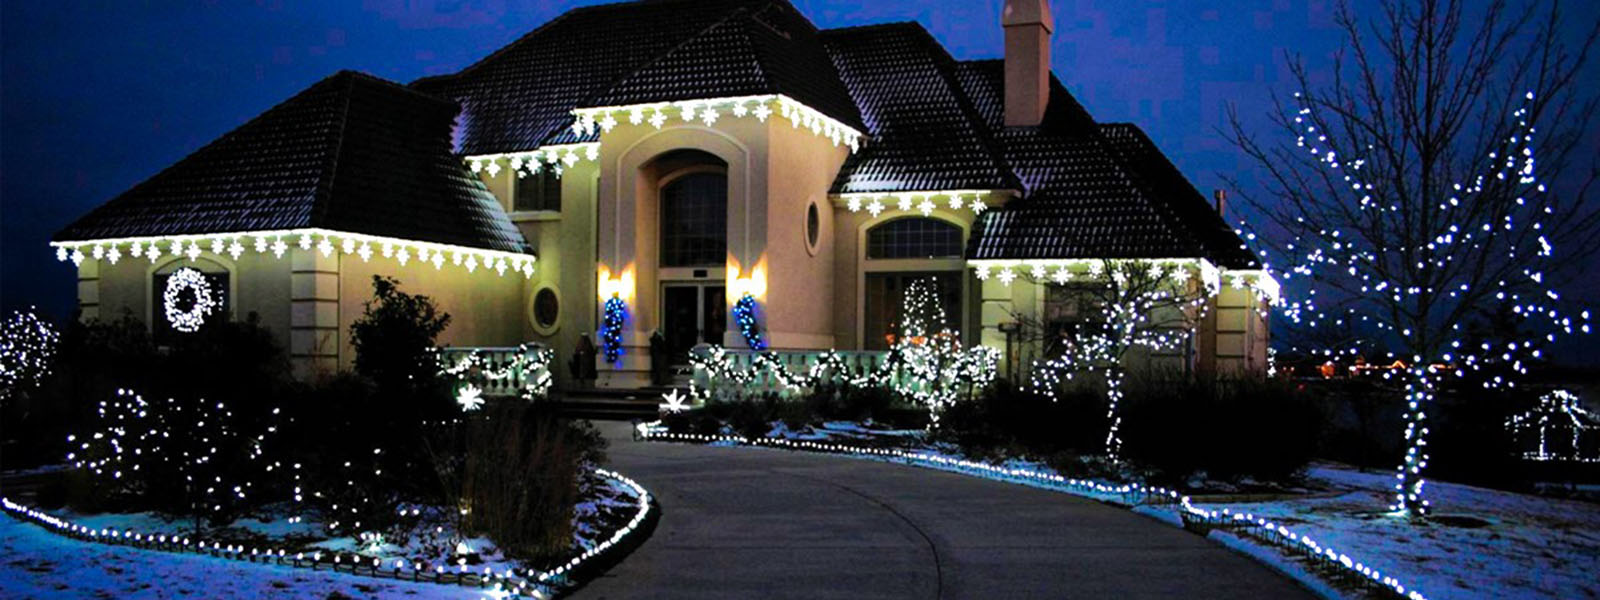 The Lawn Barber Holiday Lighting Installed Long Island